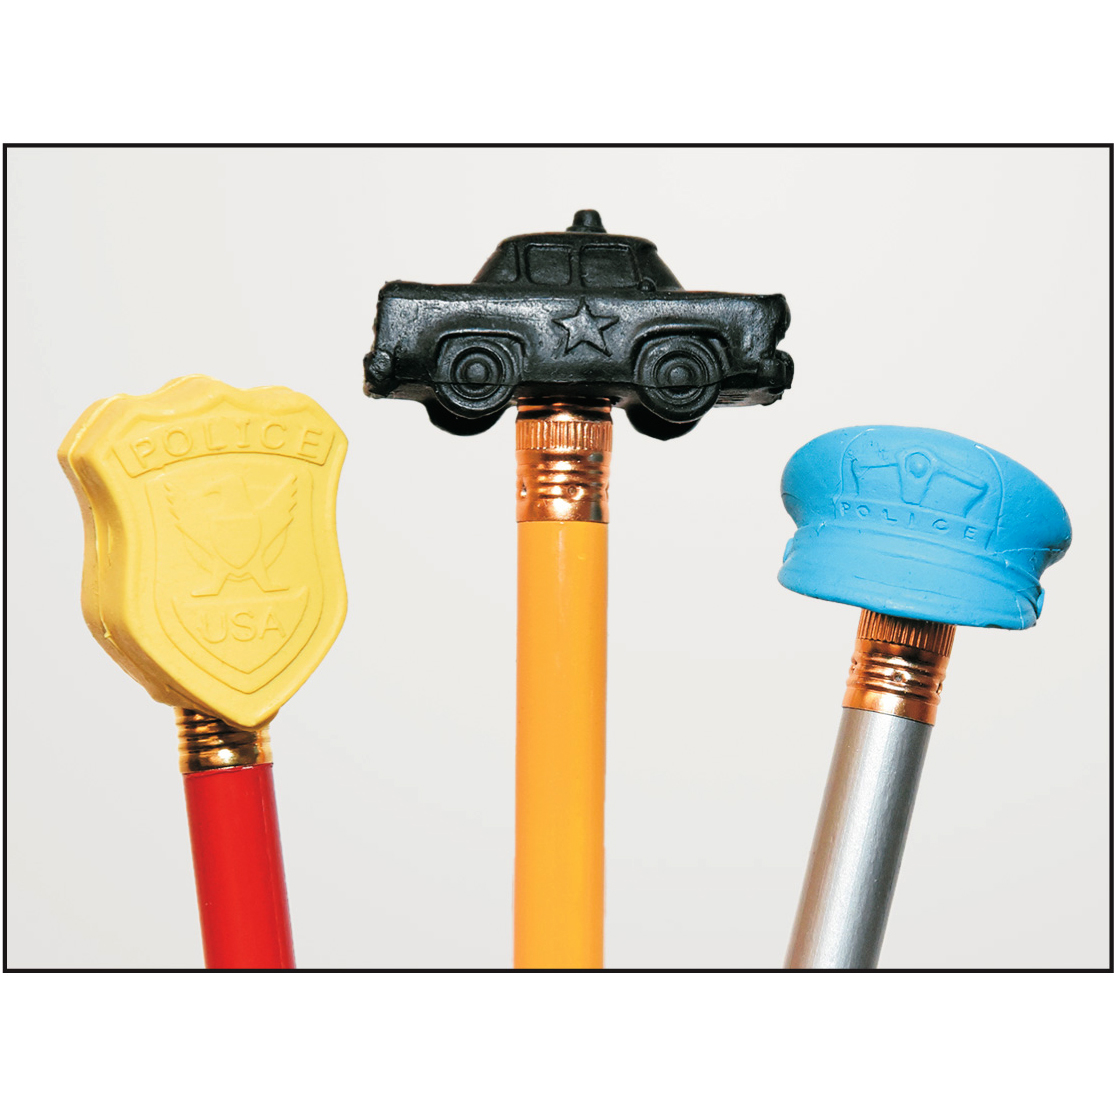 Pencil Top Erasers - Police Themed (Stock)